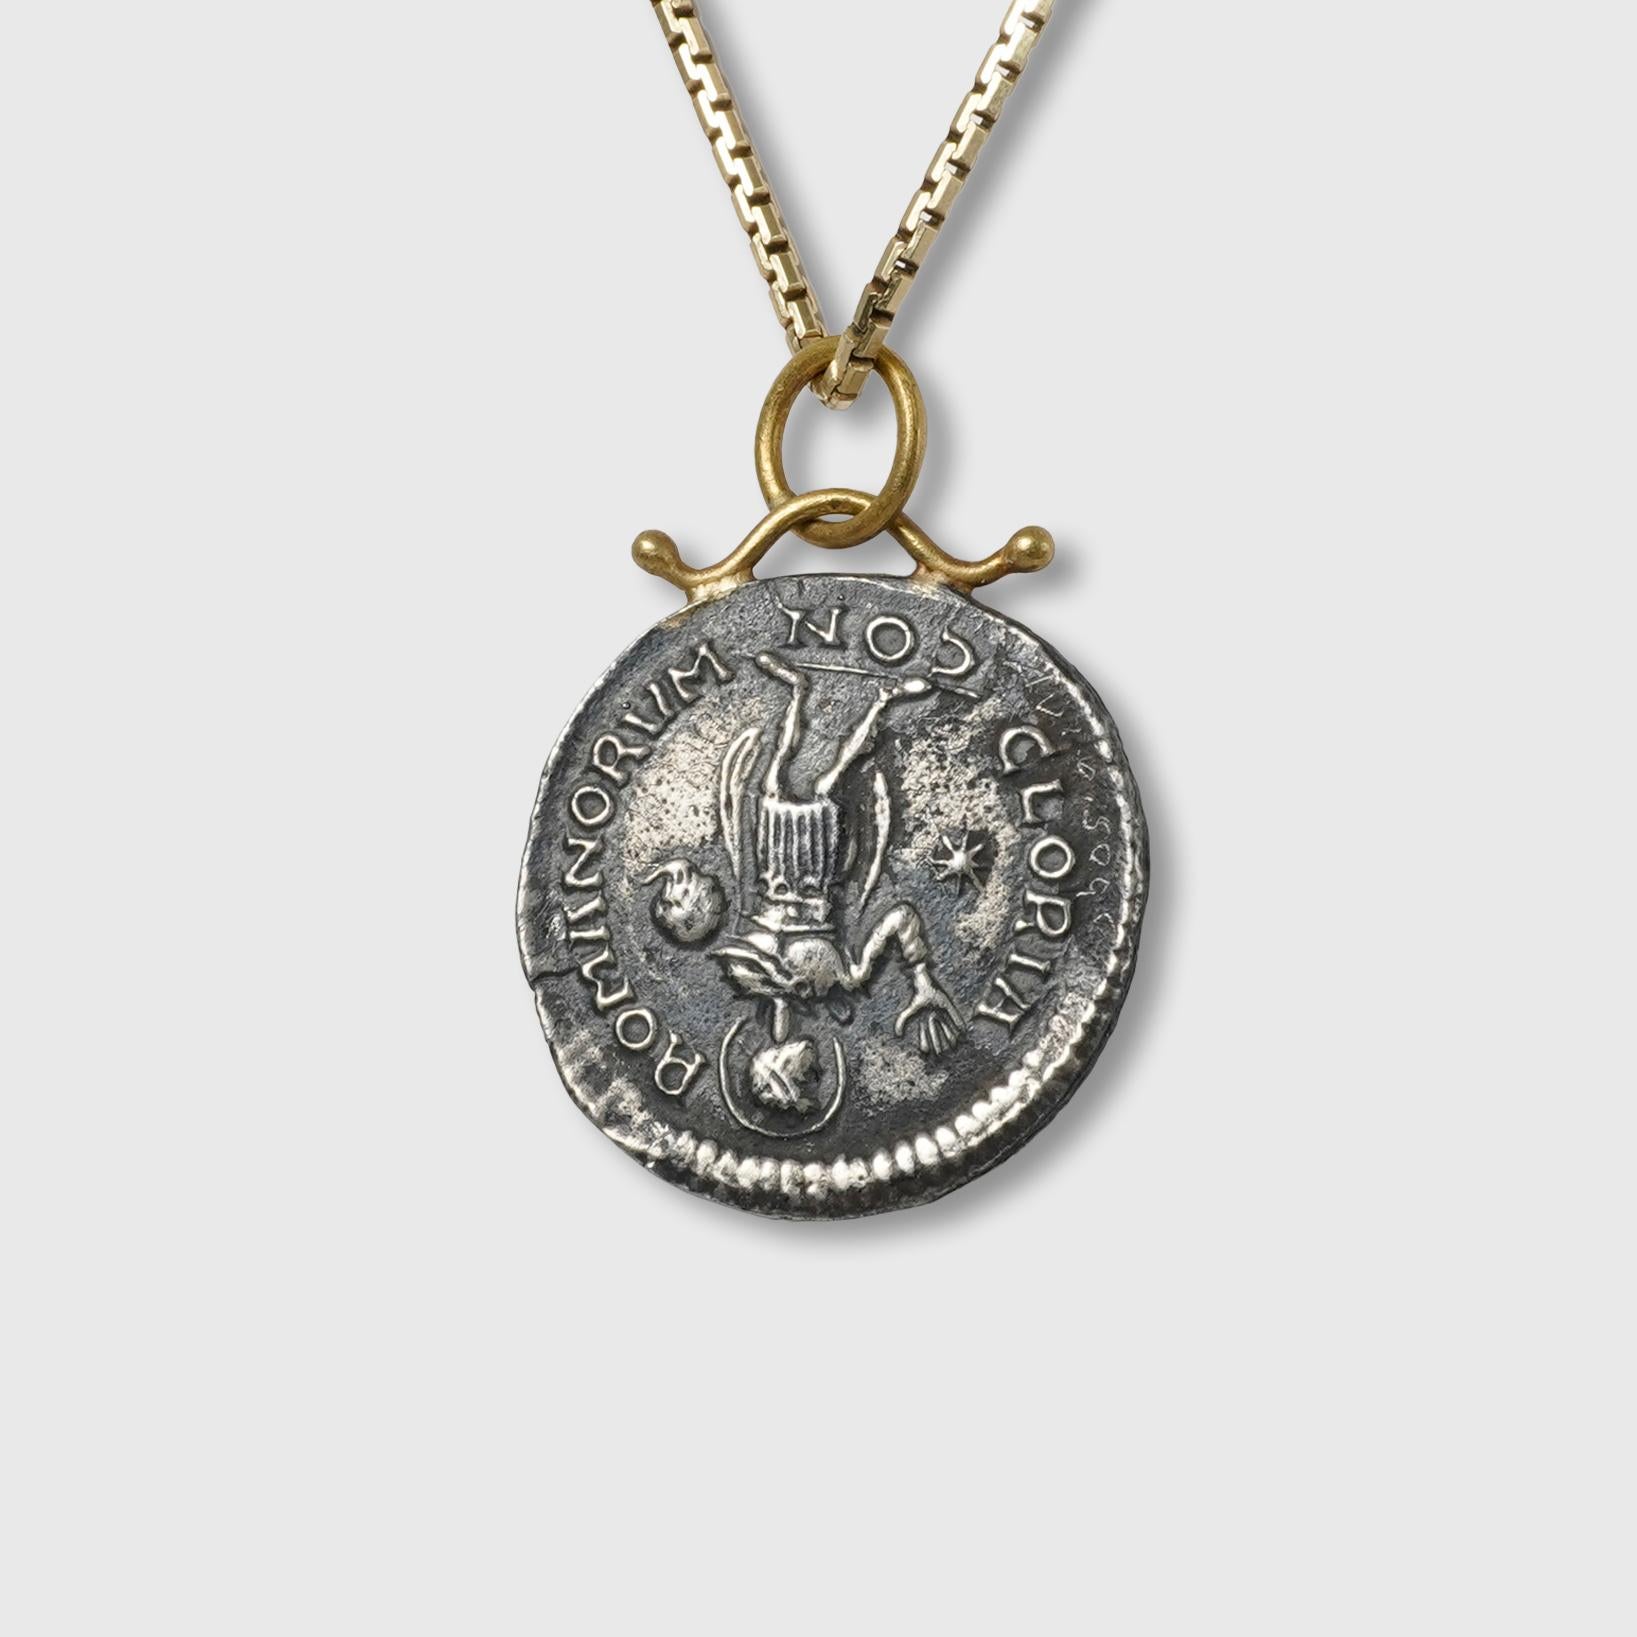 Roman Caesar Replica Coin Charm Pendant, 24kt Gold, Silver and 0.02ct Diamond

Size - Medium, 
1 Diamond - 0.02cts
24kt Gold - 0.50 grams
SS 925 - 3.17 grams

THE STORY

Caesares; in Greek: Καῖσαρ Kaîsar) is a title of imperial character. It derives